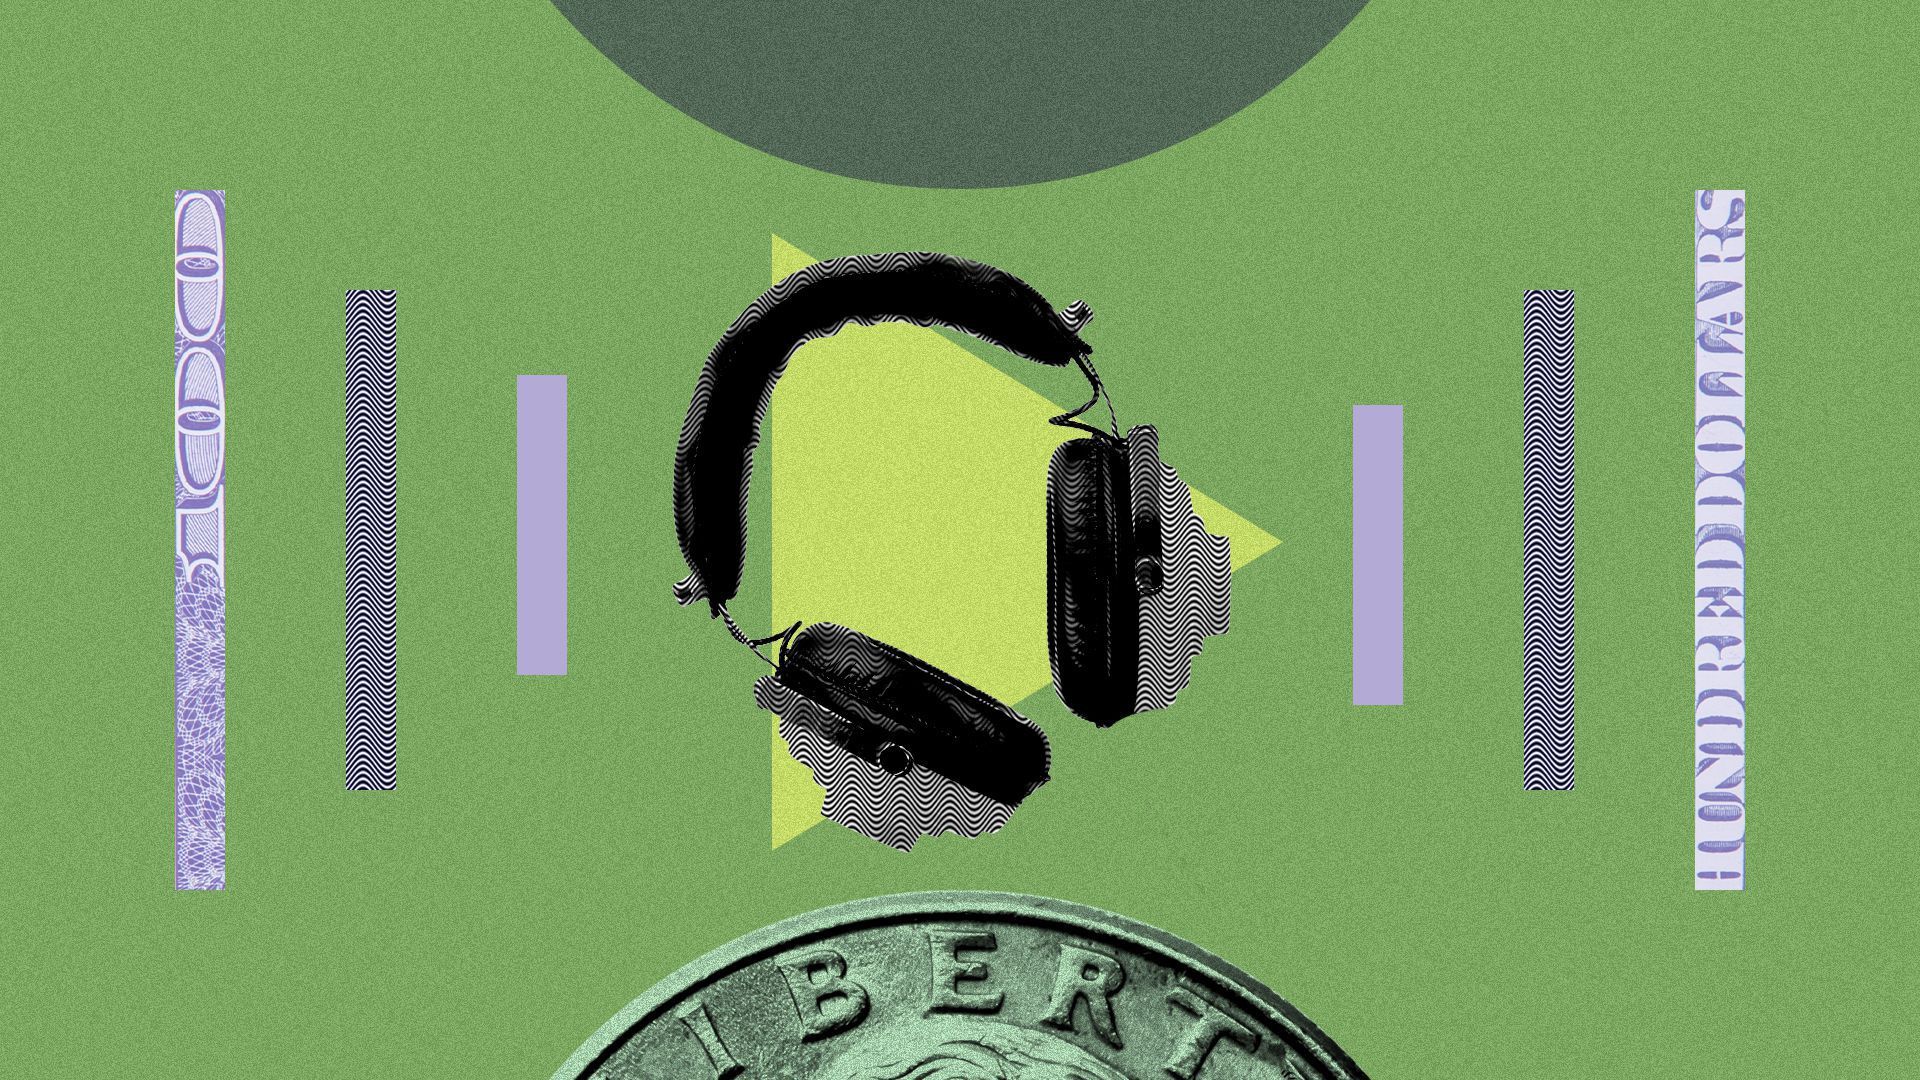 Illustration of headphones against a dollar and coins